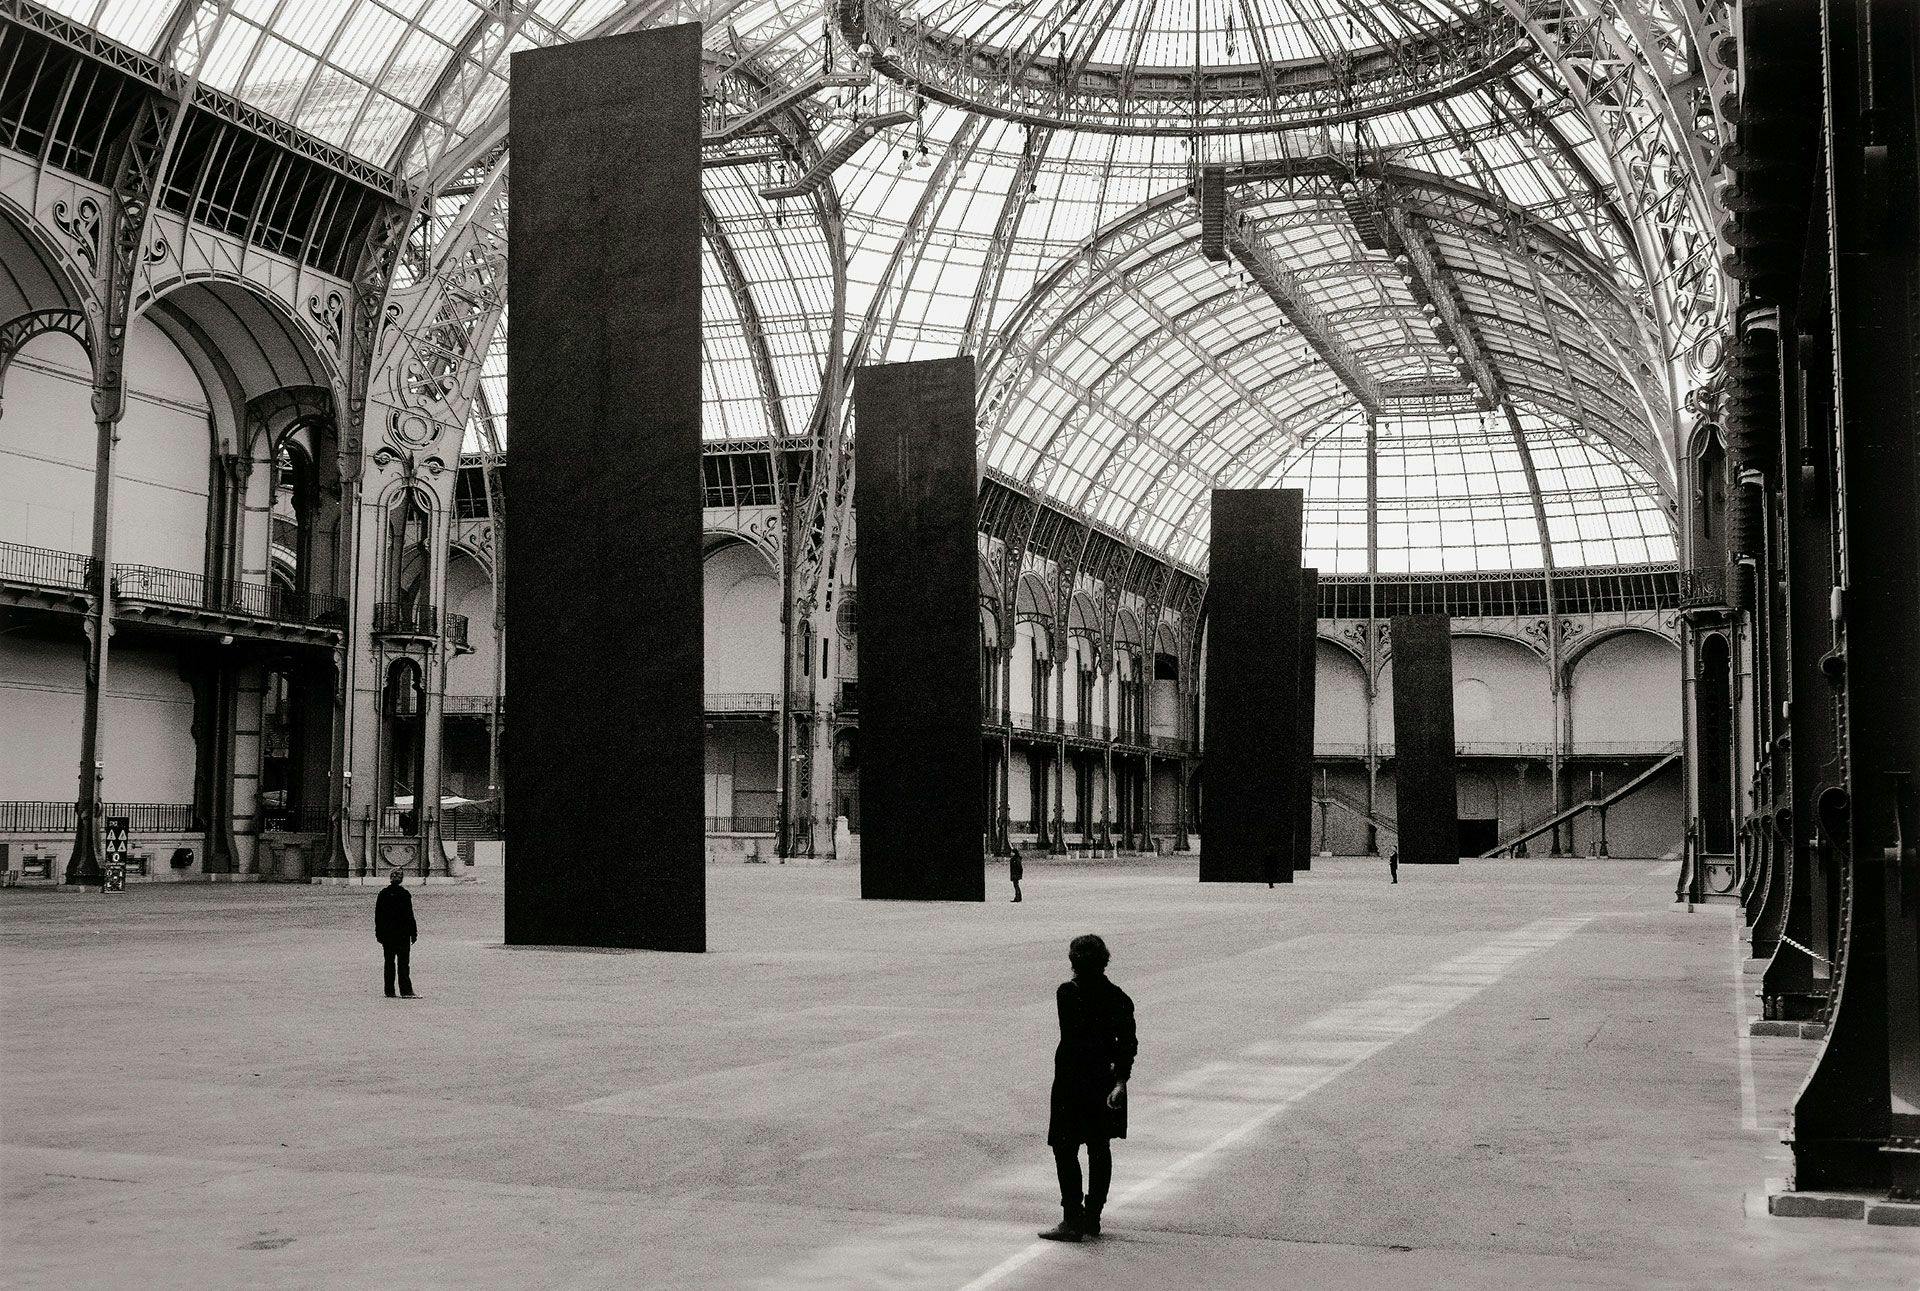 Installation view of steel sculpture by Richard Serra at the Grand Palais, dated 2008.